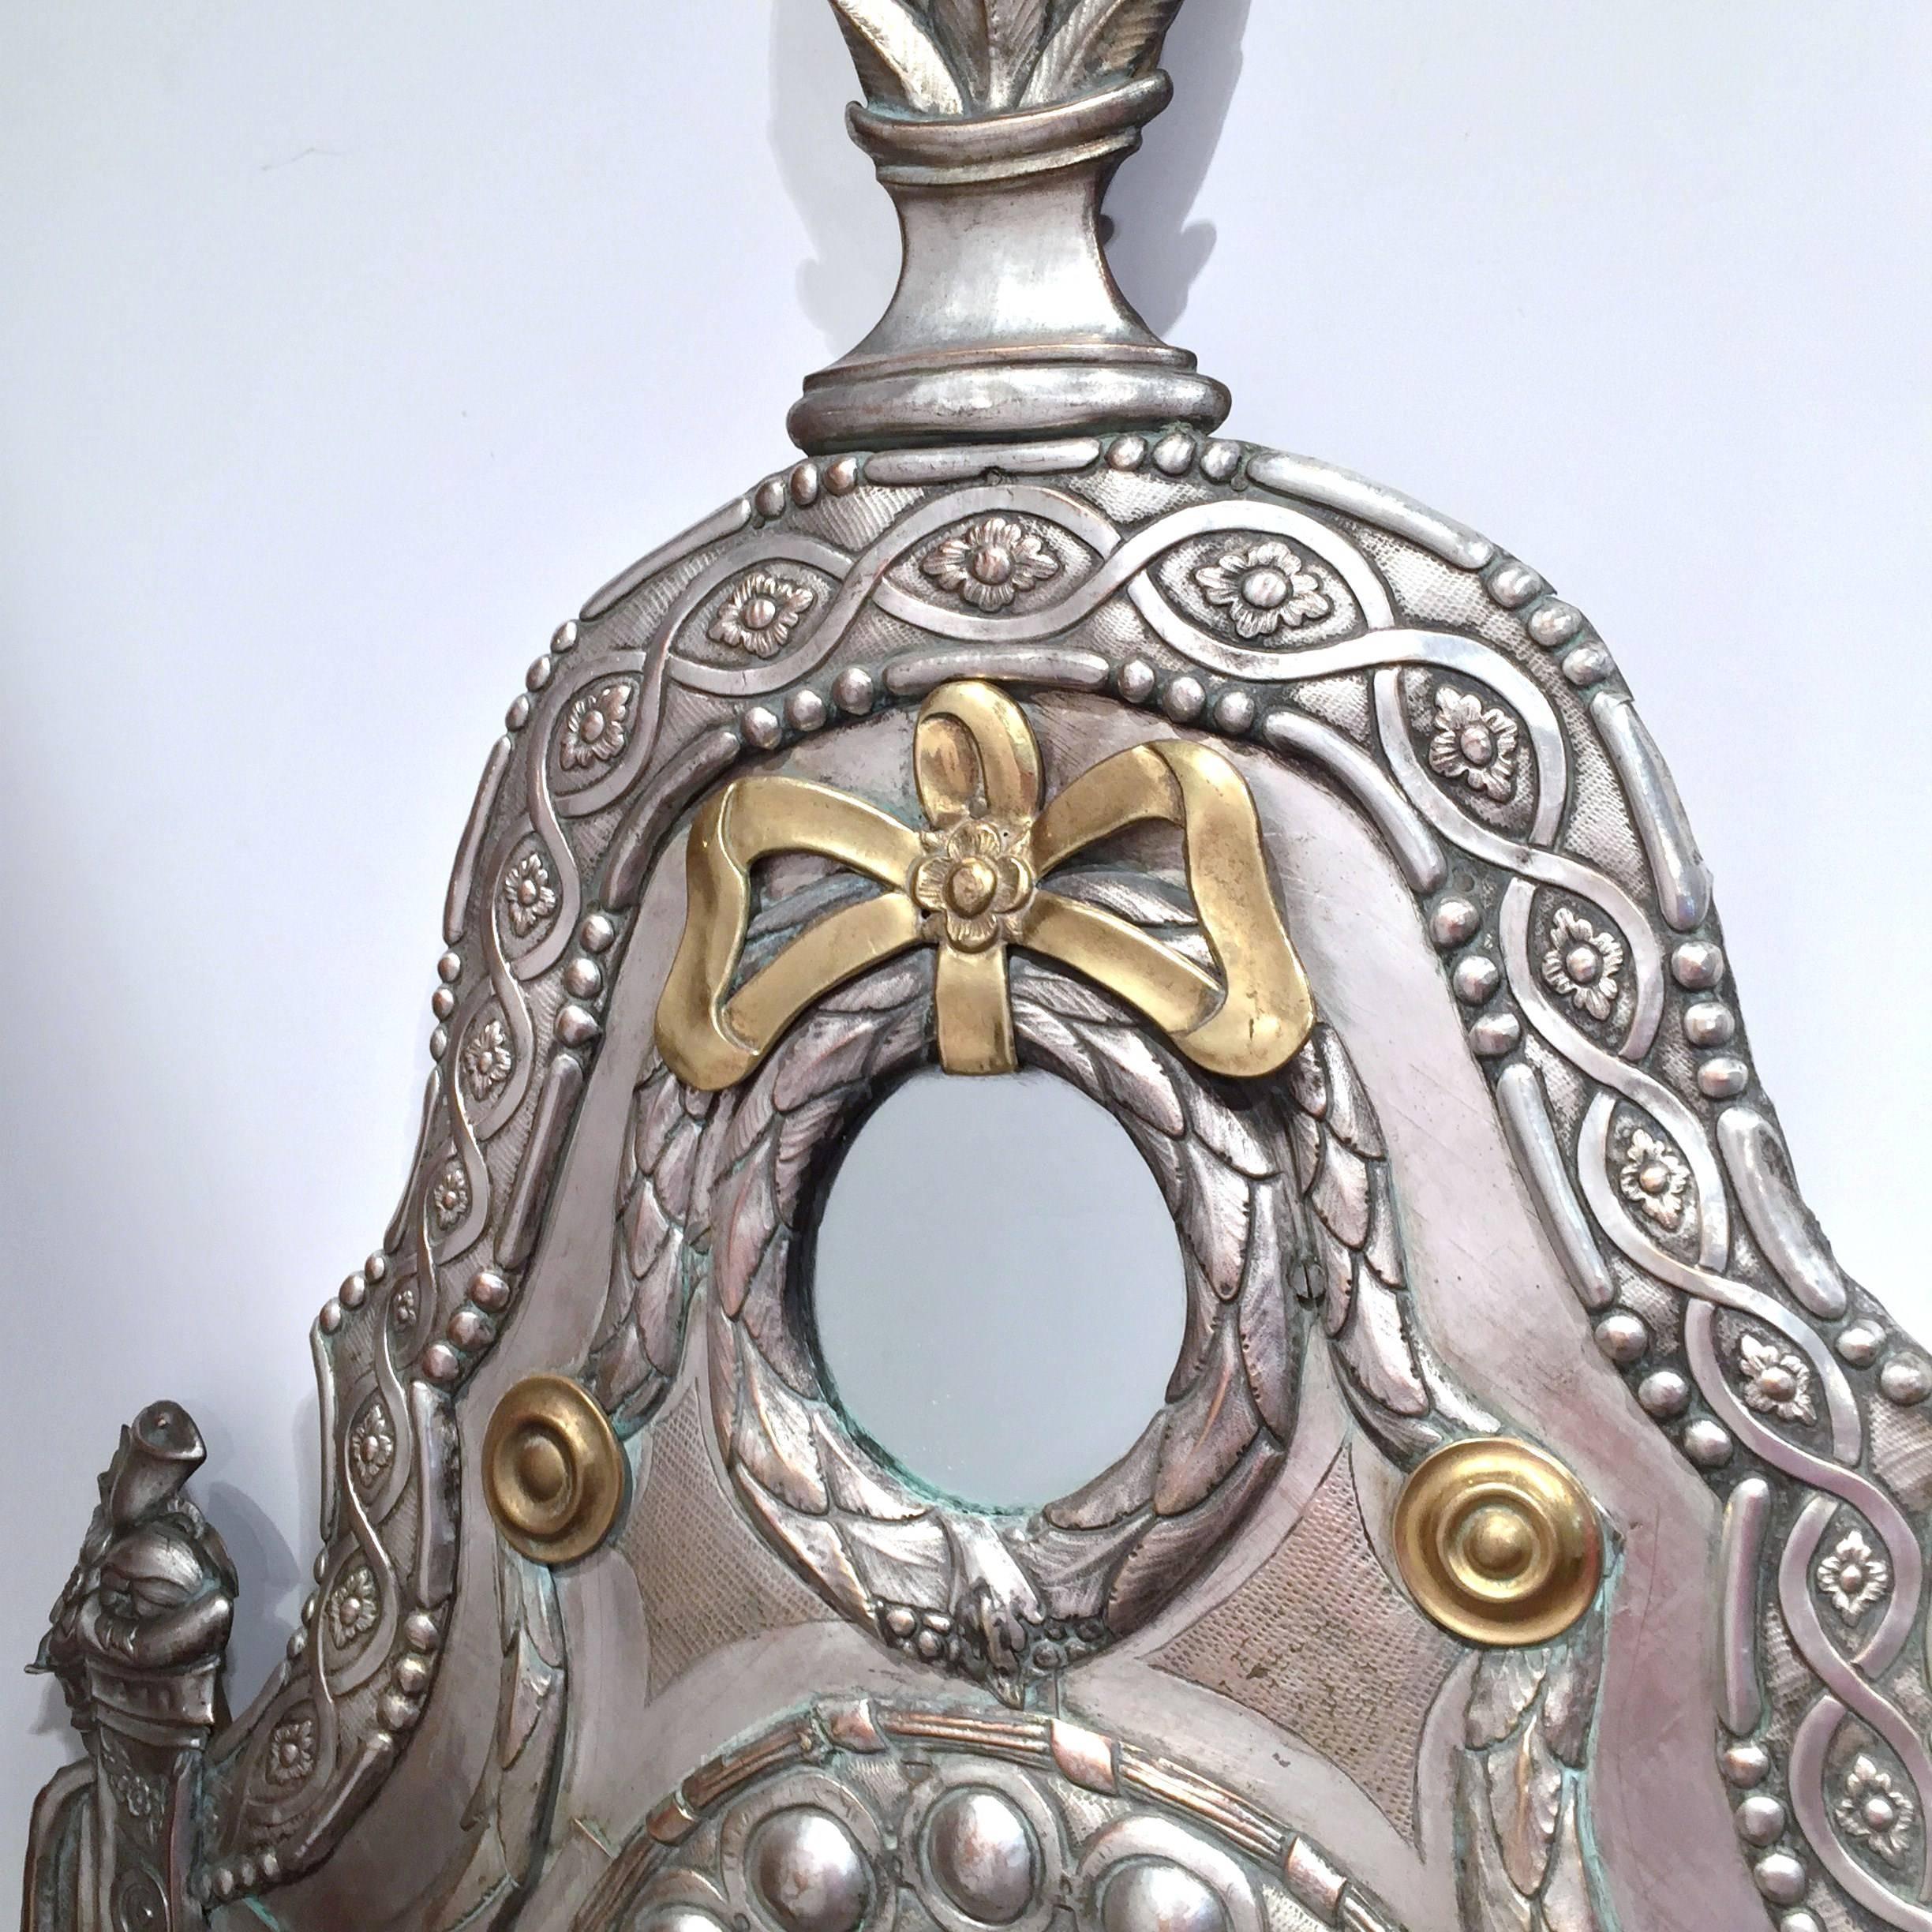 Patinated 19th Century French Repousse Silver Plated and Copper Overlay Wall Mirror